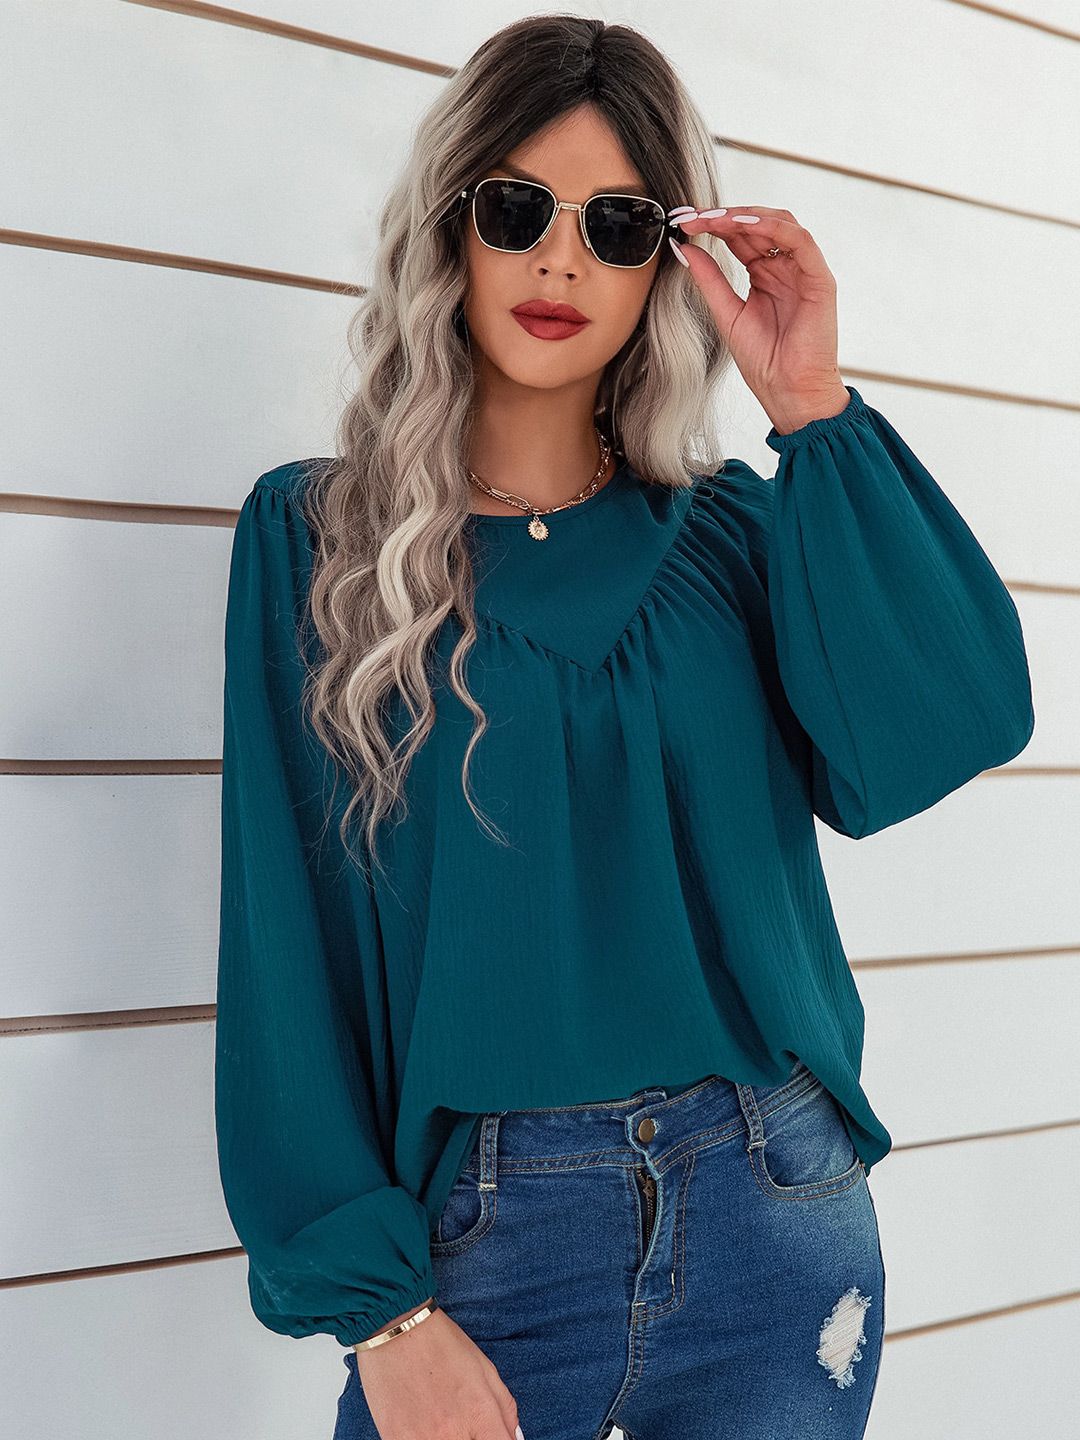 StyleCast Teal Regular Top Price in India